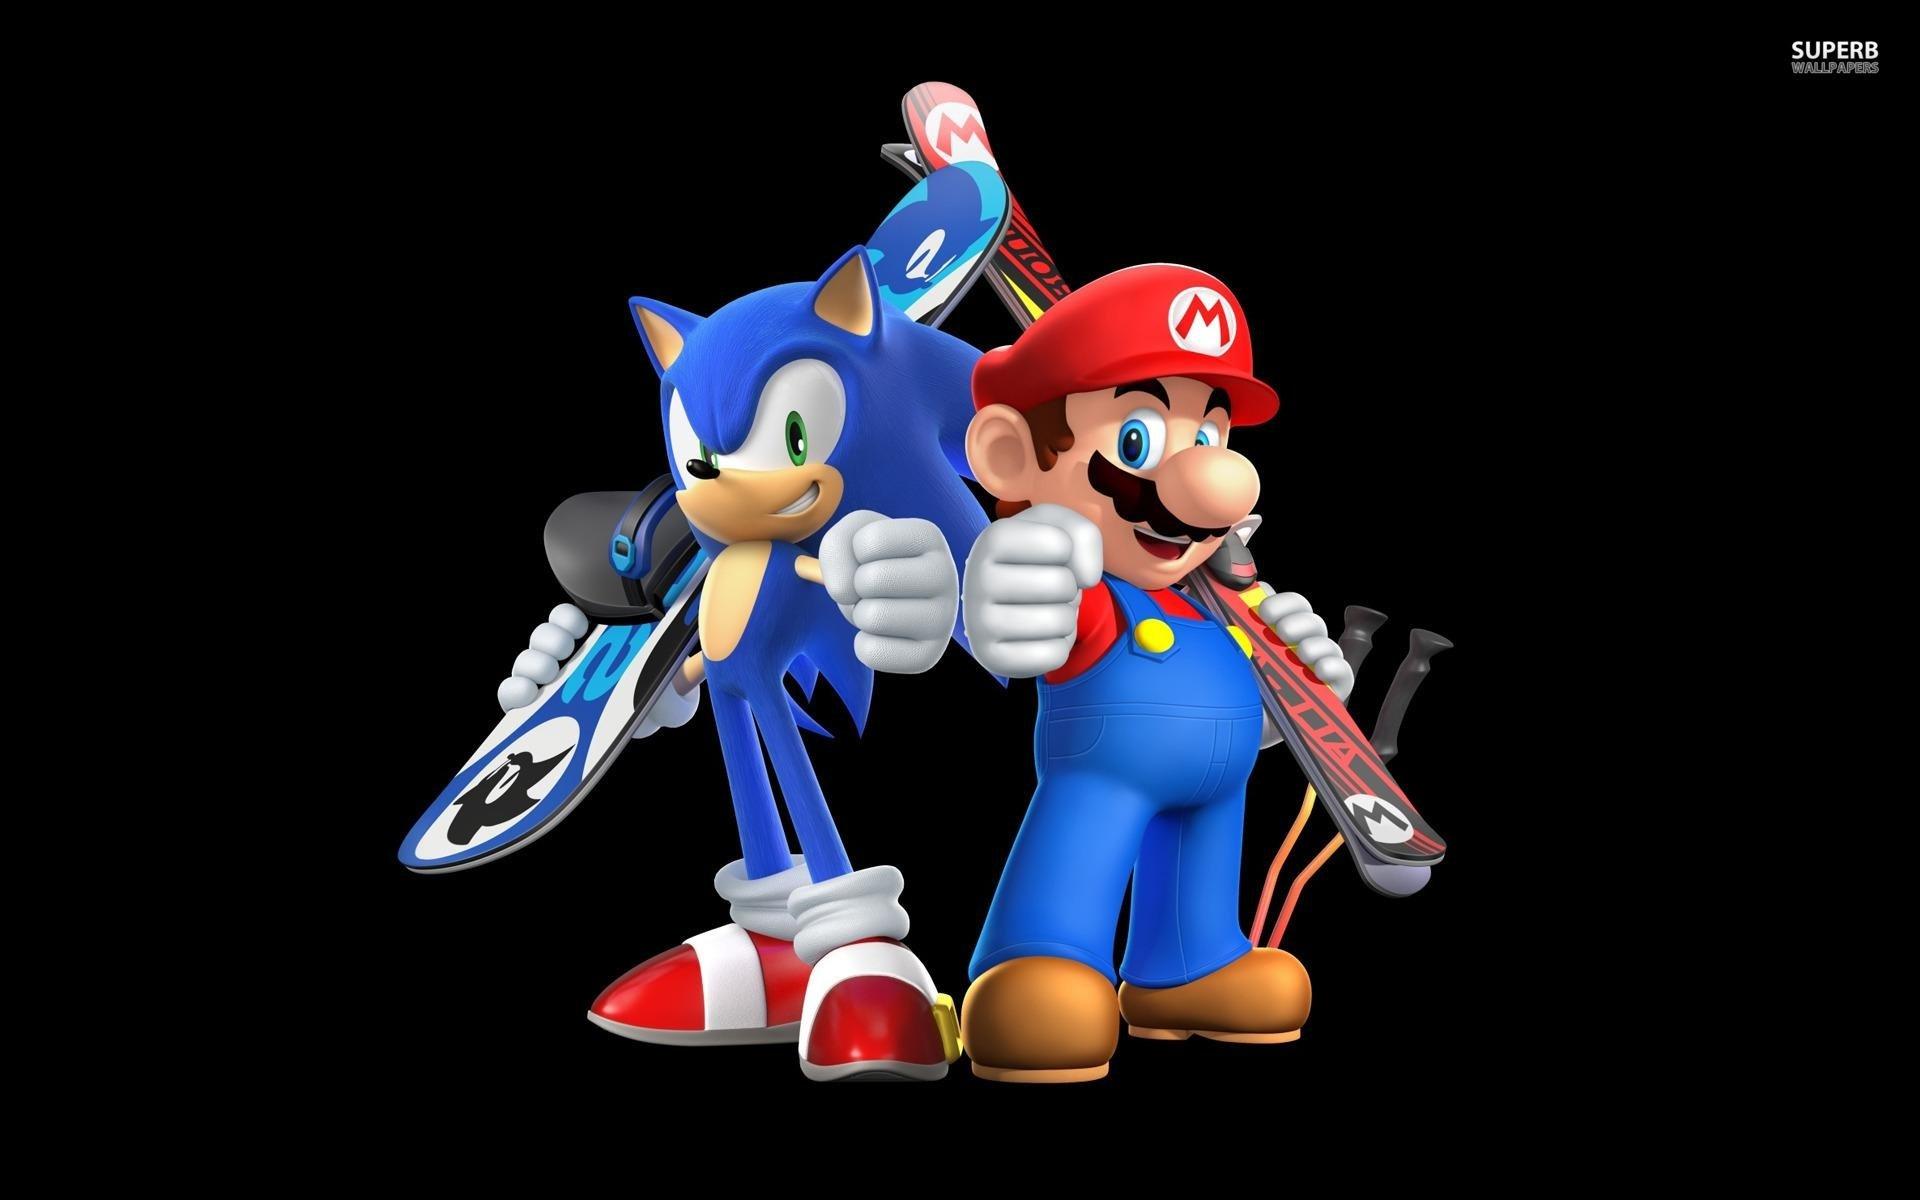 Mario & Sonic: Mario and Sonic at the Olympic Winter Games (Sochi, 2014) HD Wallpaper